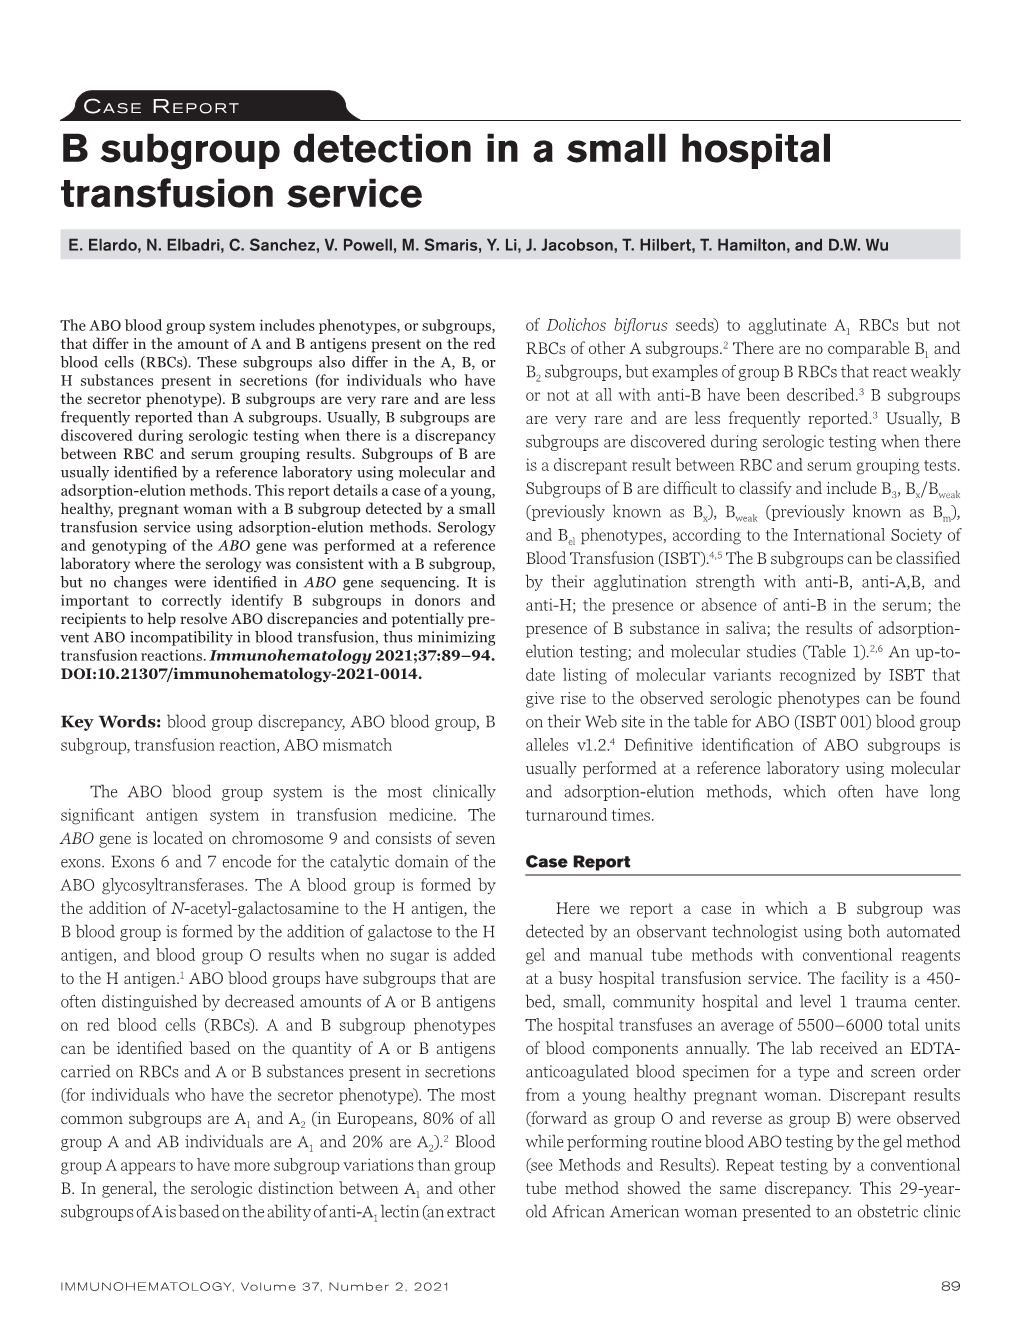 B Subgroup Detection in a Small Hospital Transfusion Service